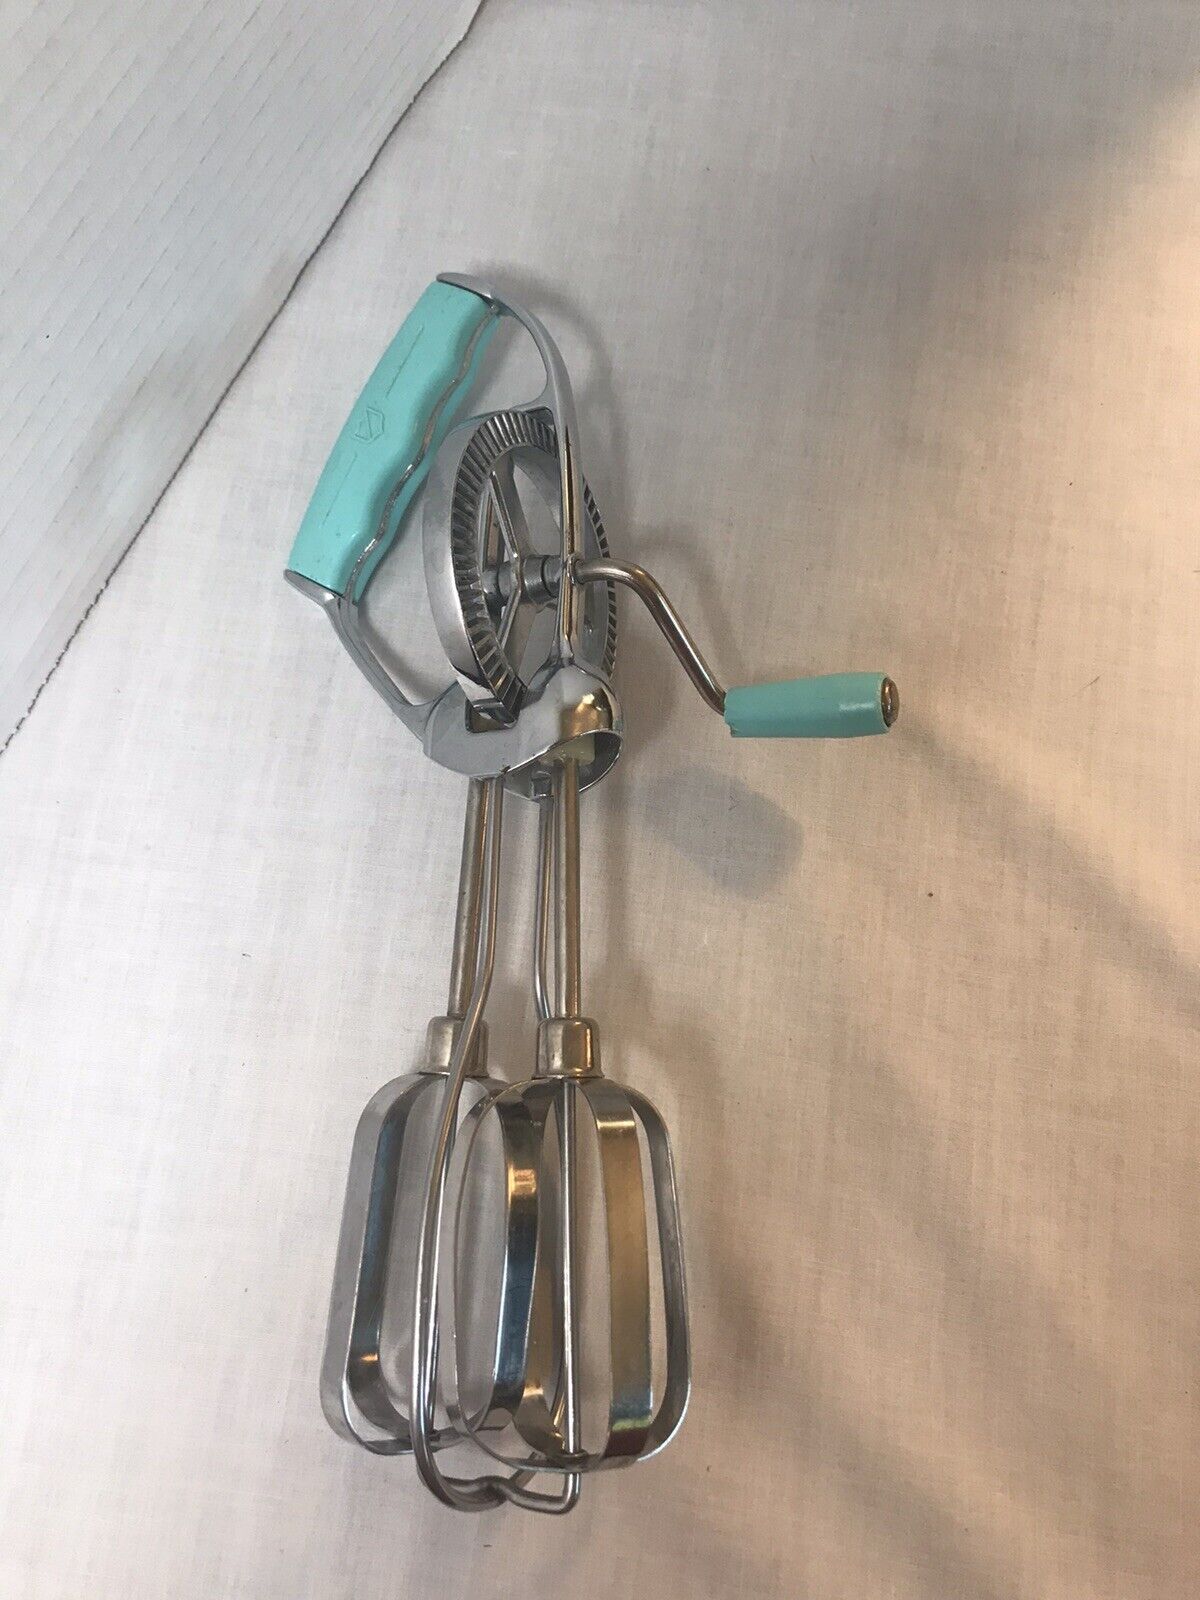 Vintage 1950’s Turner And Seymour Hand Mixer Turquoise Bakelite Stainless Steel